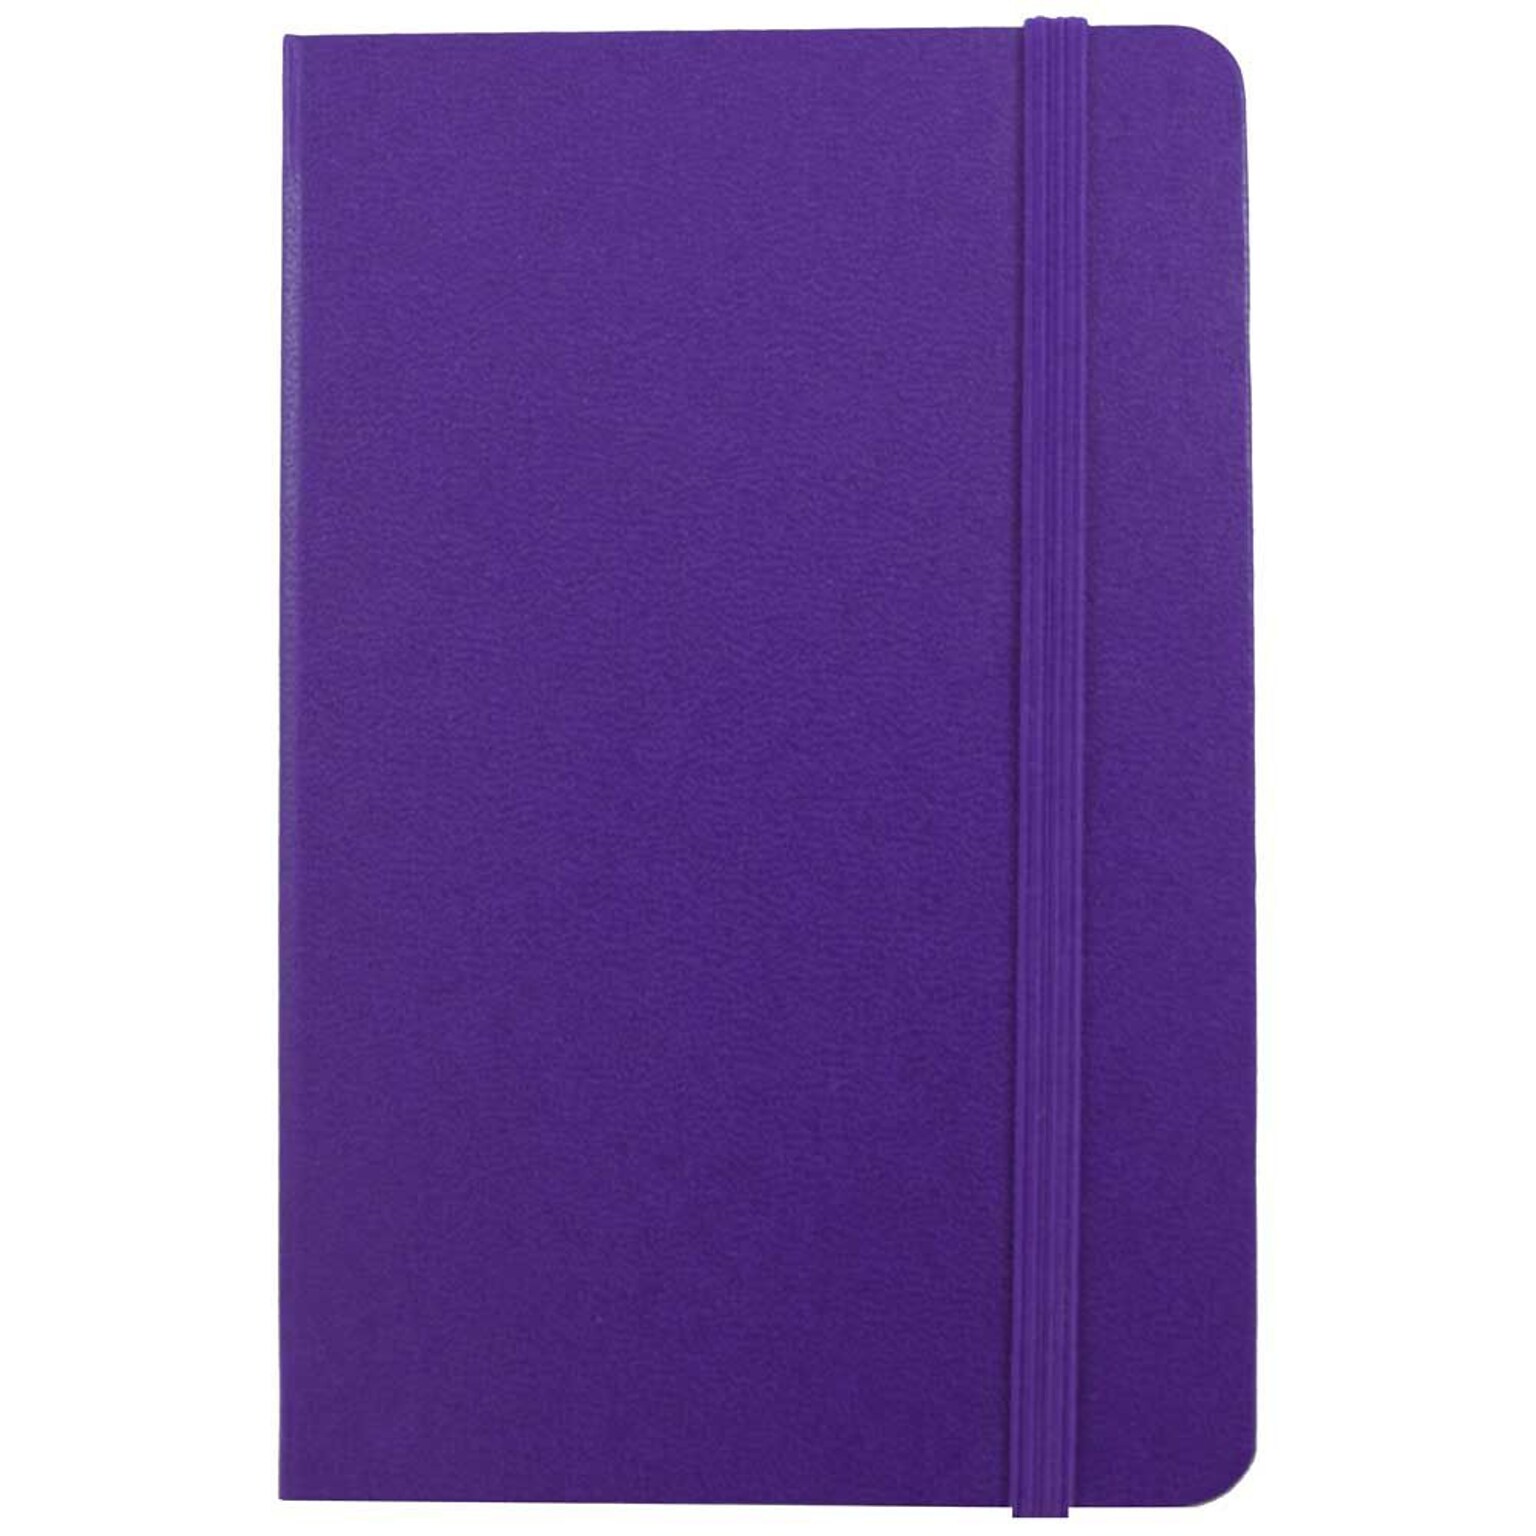 JAM Paper® Hardcover Lined Notebook with Elastic Closure, Large, 5 7/8 x 8 1/2 Journal, Plum Purple, 1/pk (340528857)